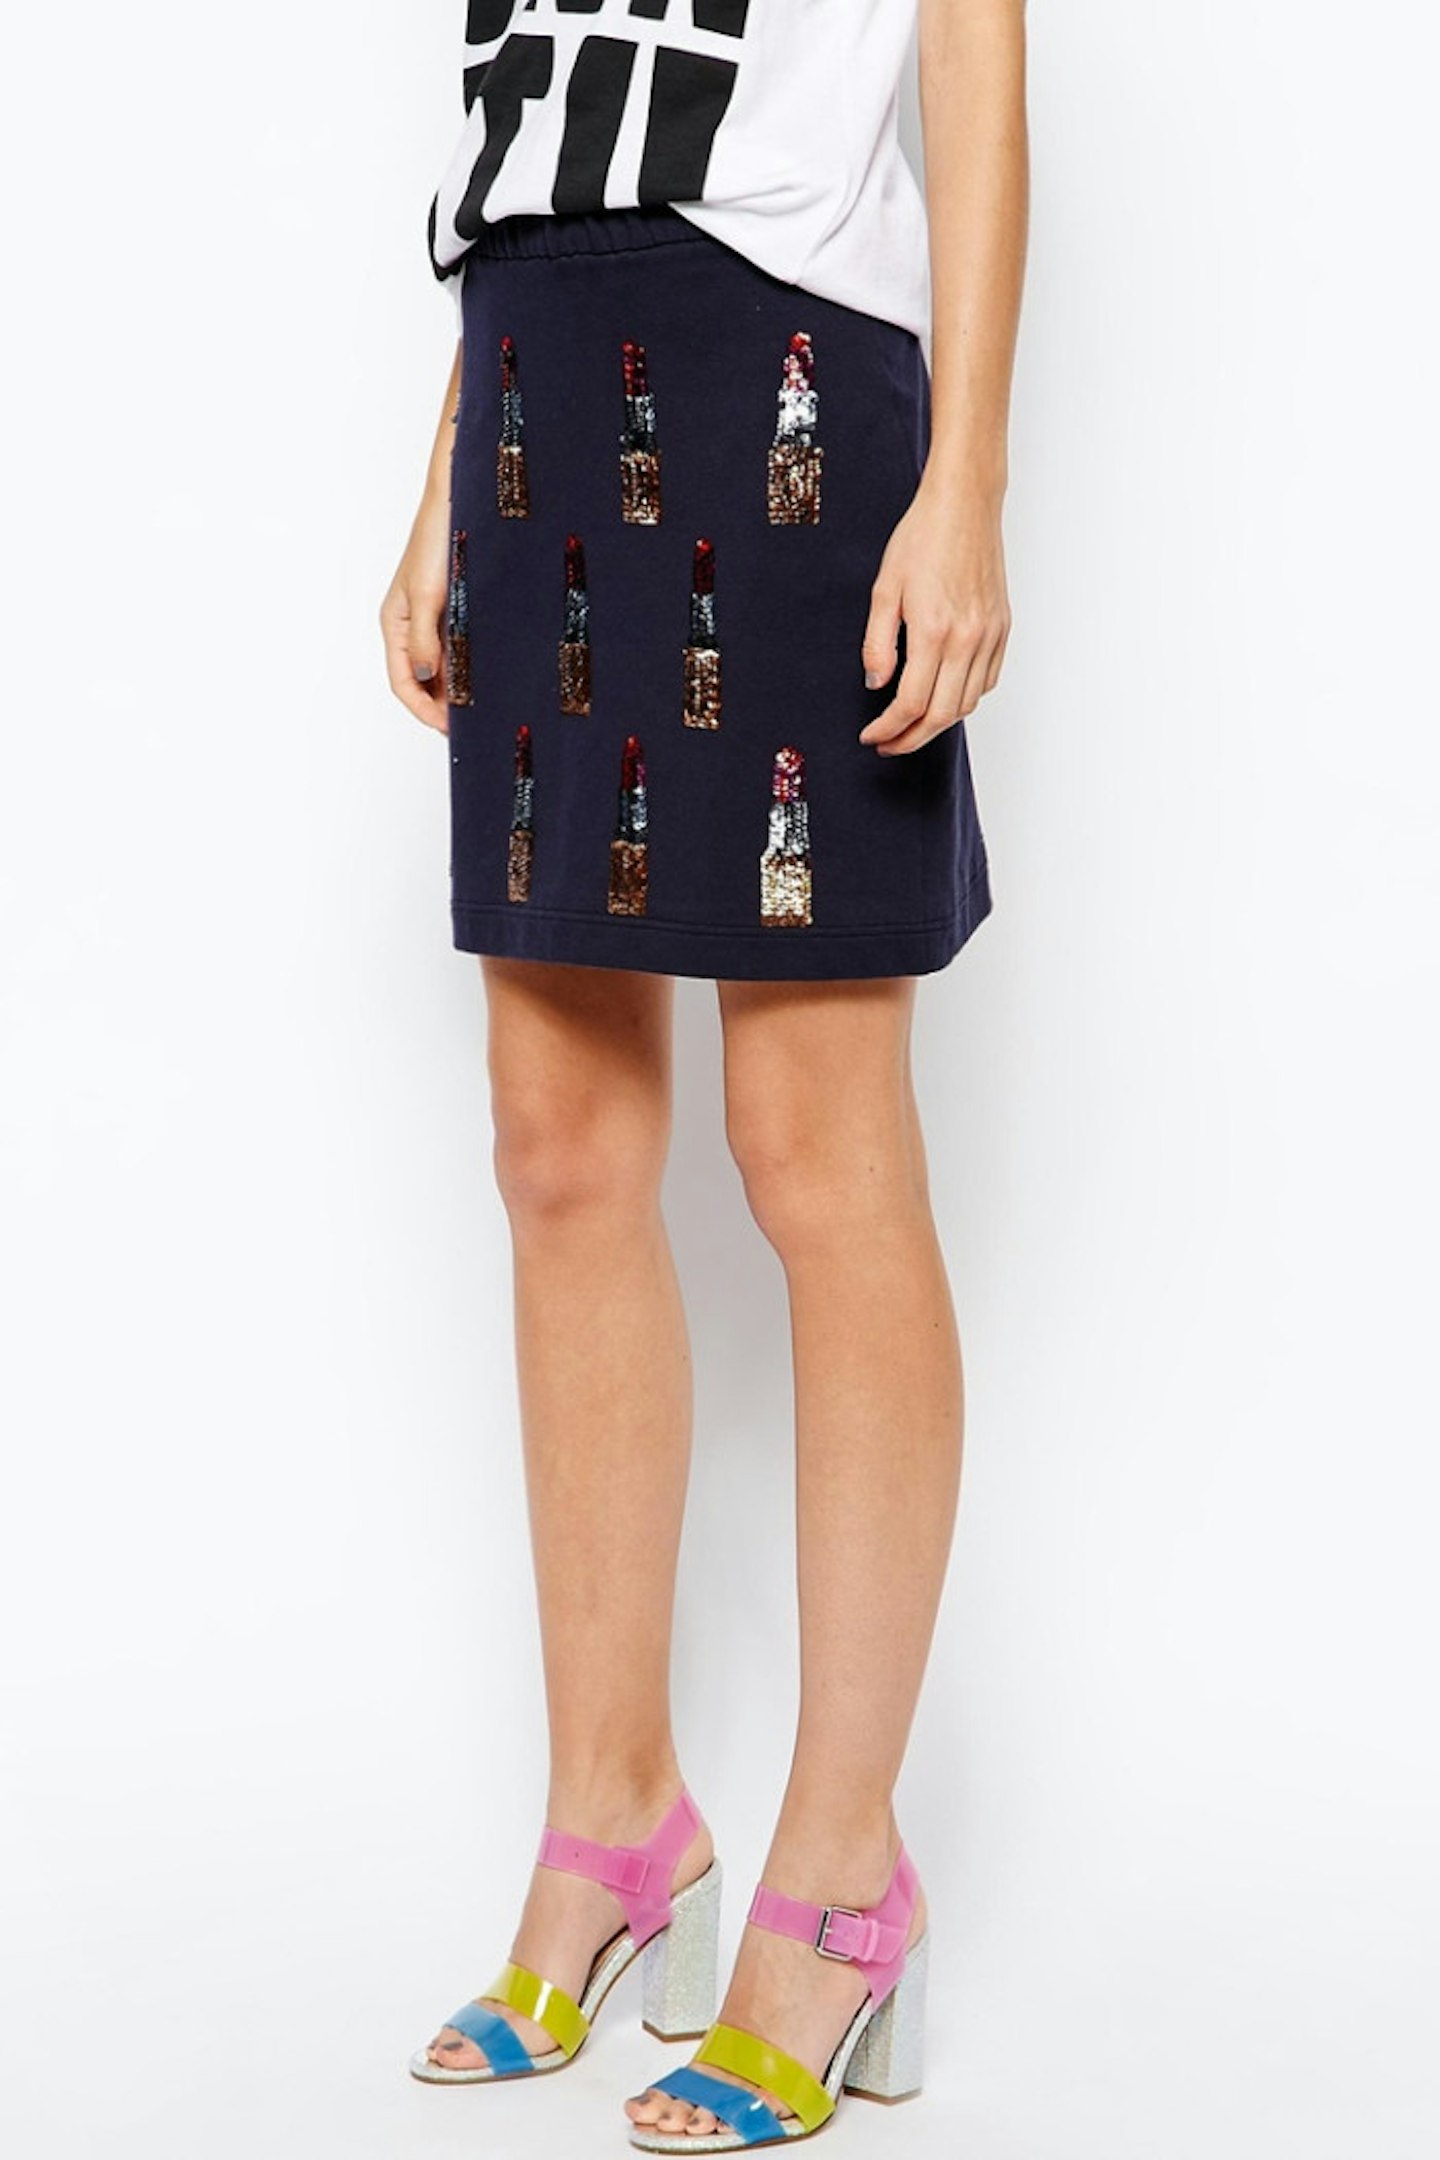 House of Holland Skirt, now £105.00, ASOS